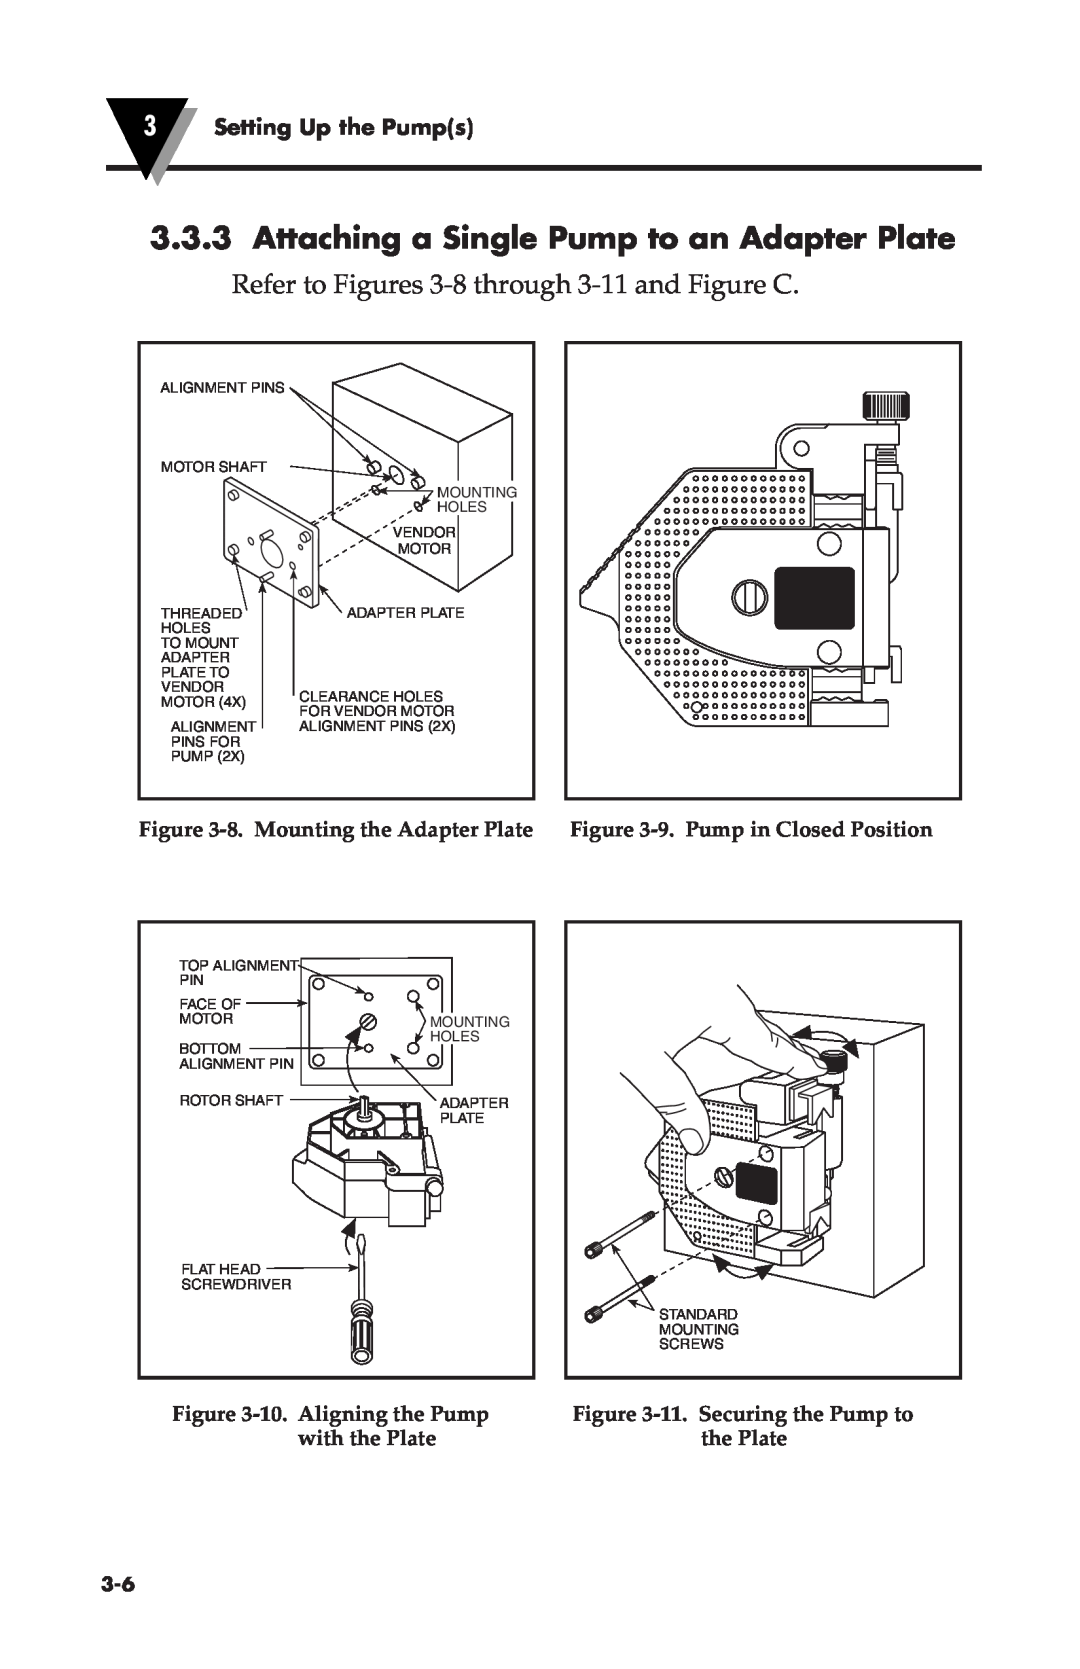 Omega Vehicle Security FPU500 Attaching a Single Pump to an Adapter Plate, Refer to Figures 3-8through 3-11and Figure C 